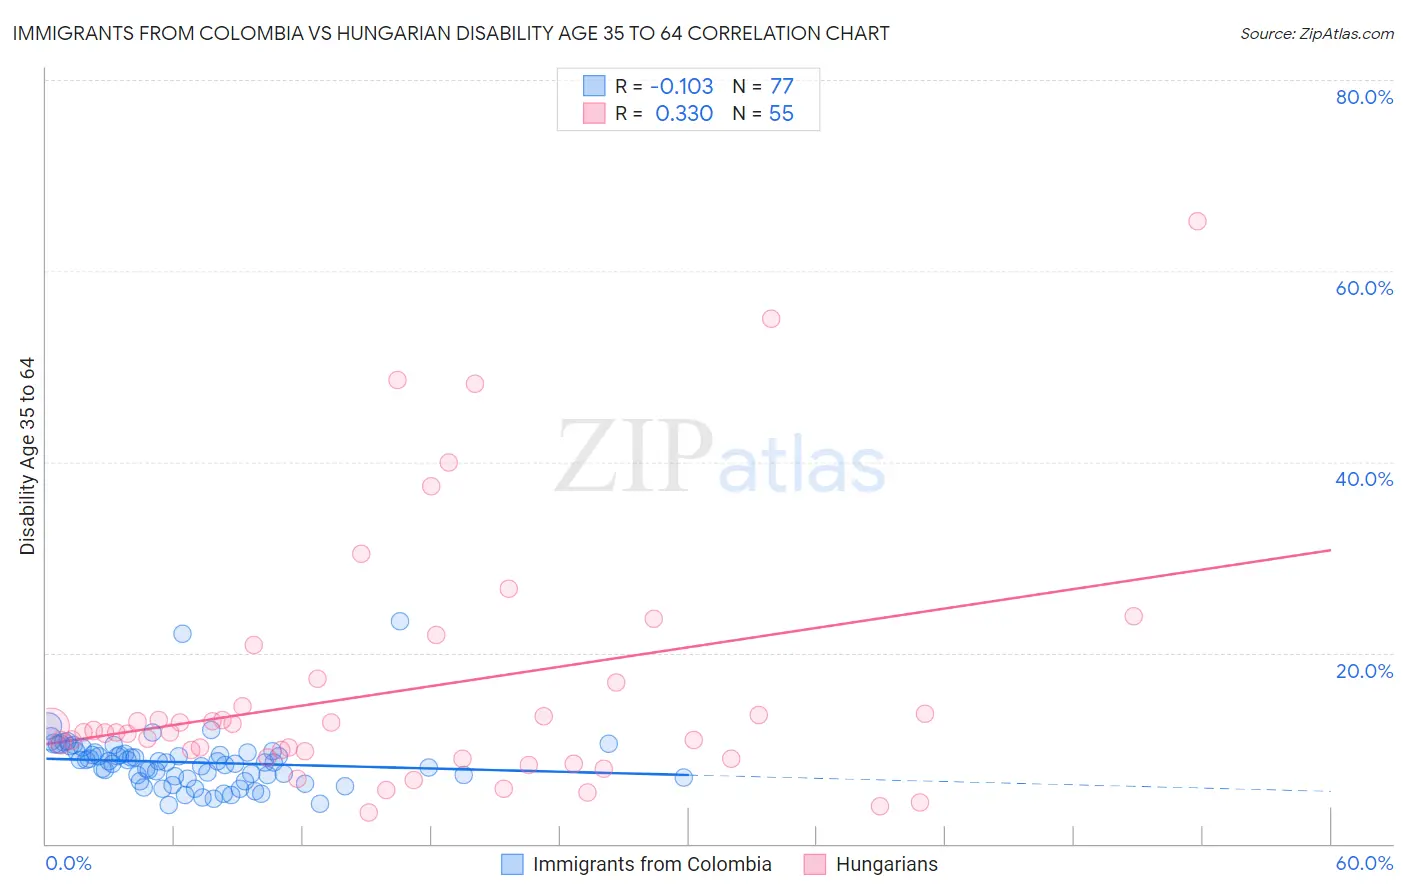 Immigrants from Colombia vs Hungarian Disability Age 35 to 64